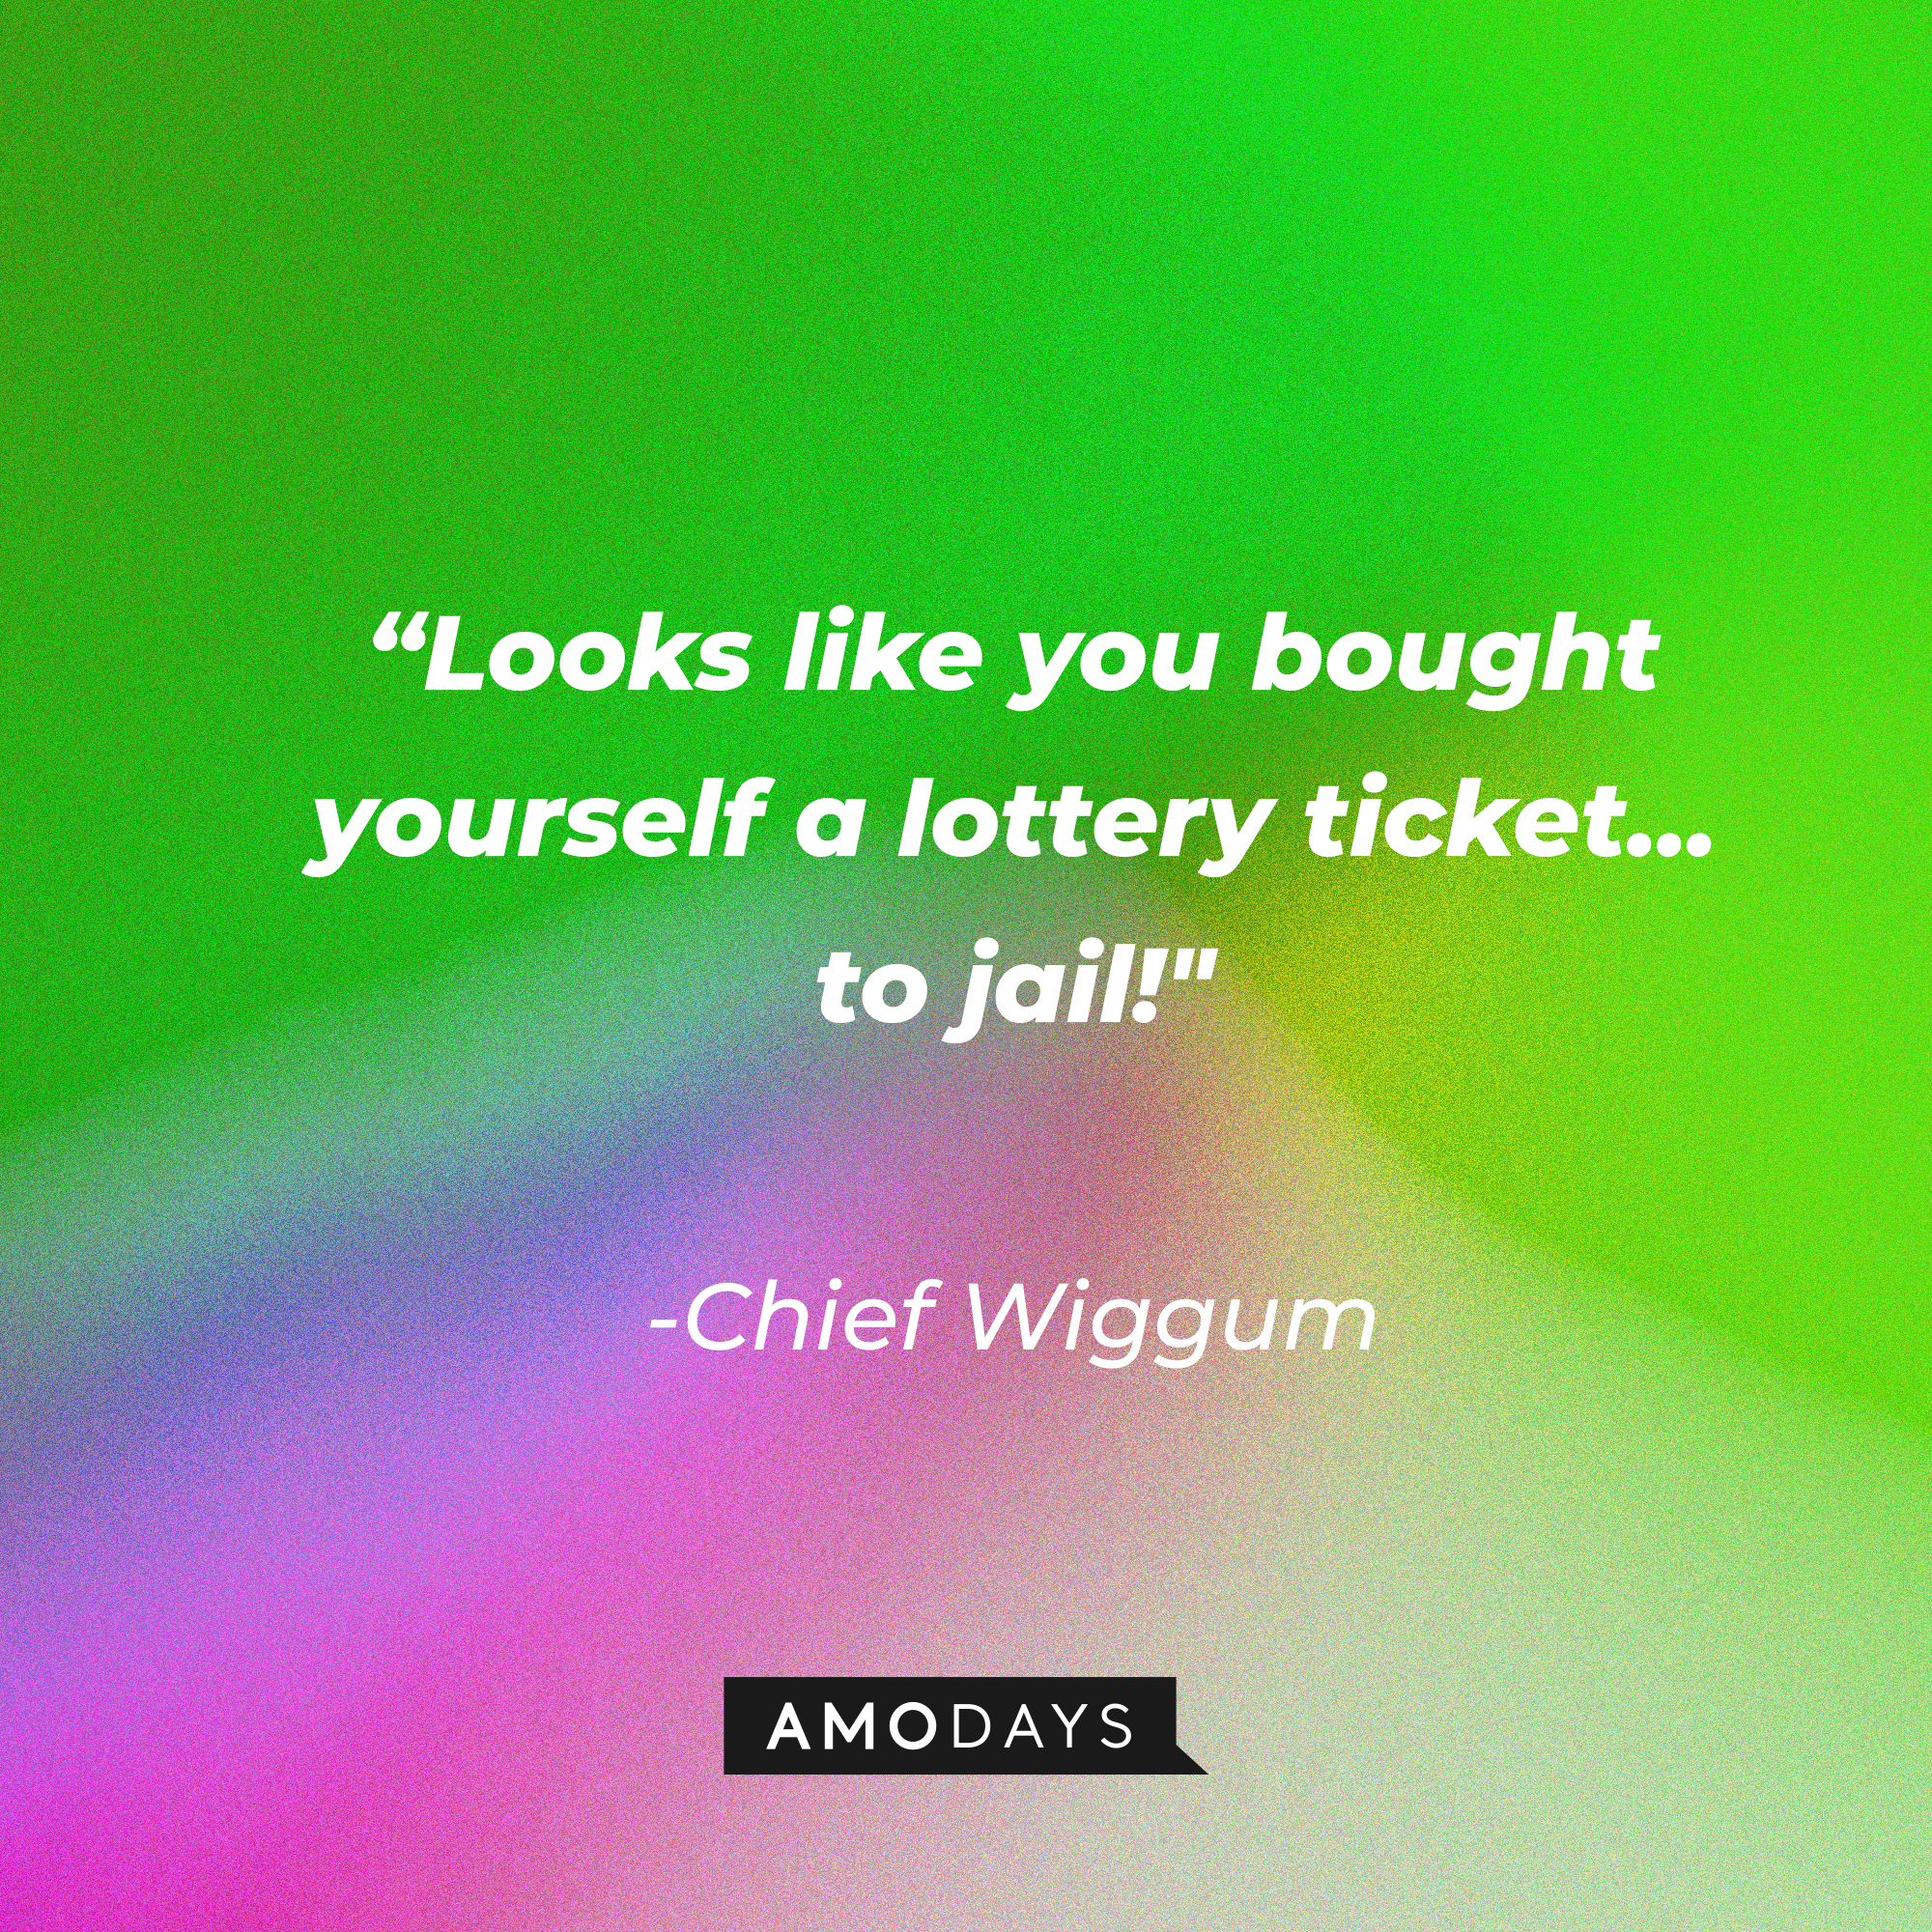 Chief Wiggum’s quote: “Looks like you bought yourself a lottery ticket...to jail!" |  Source: AmoDays